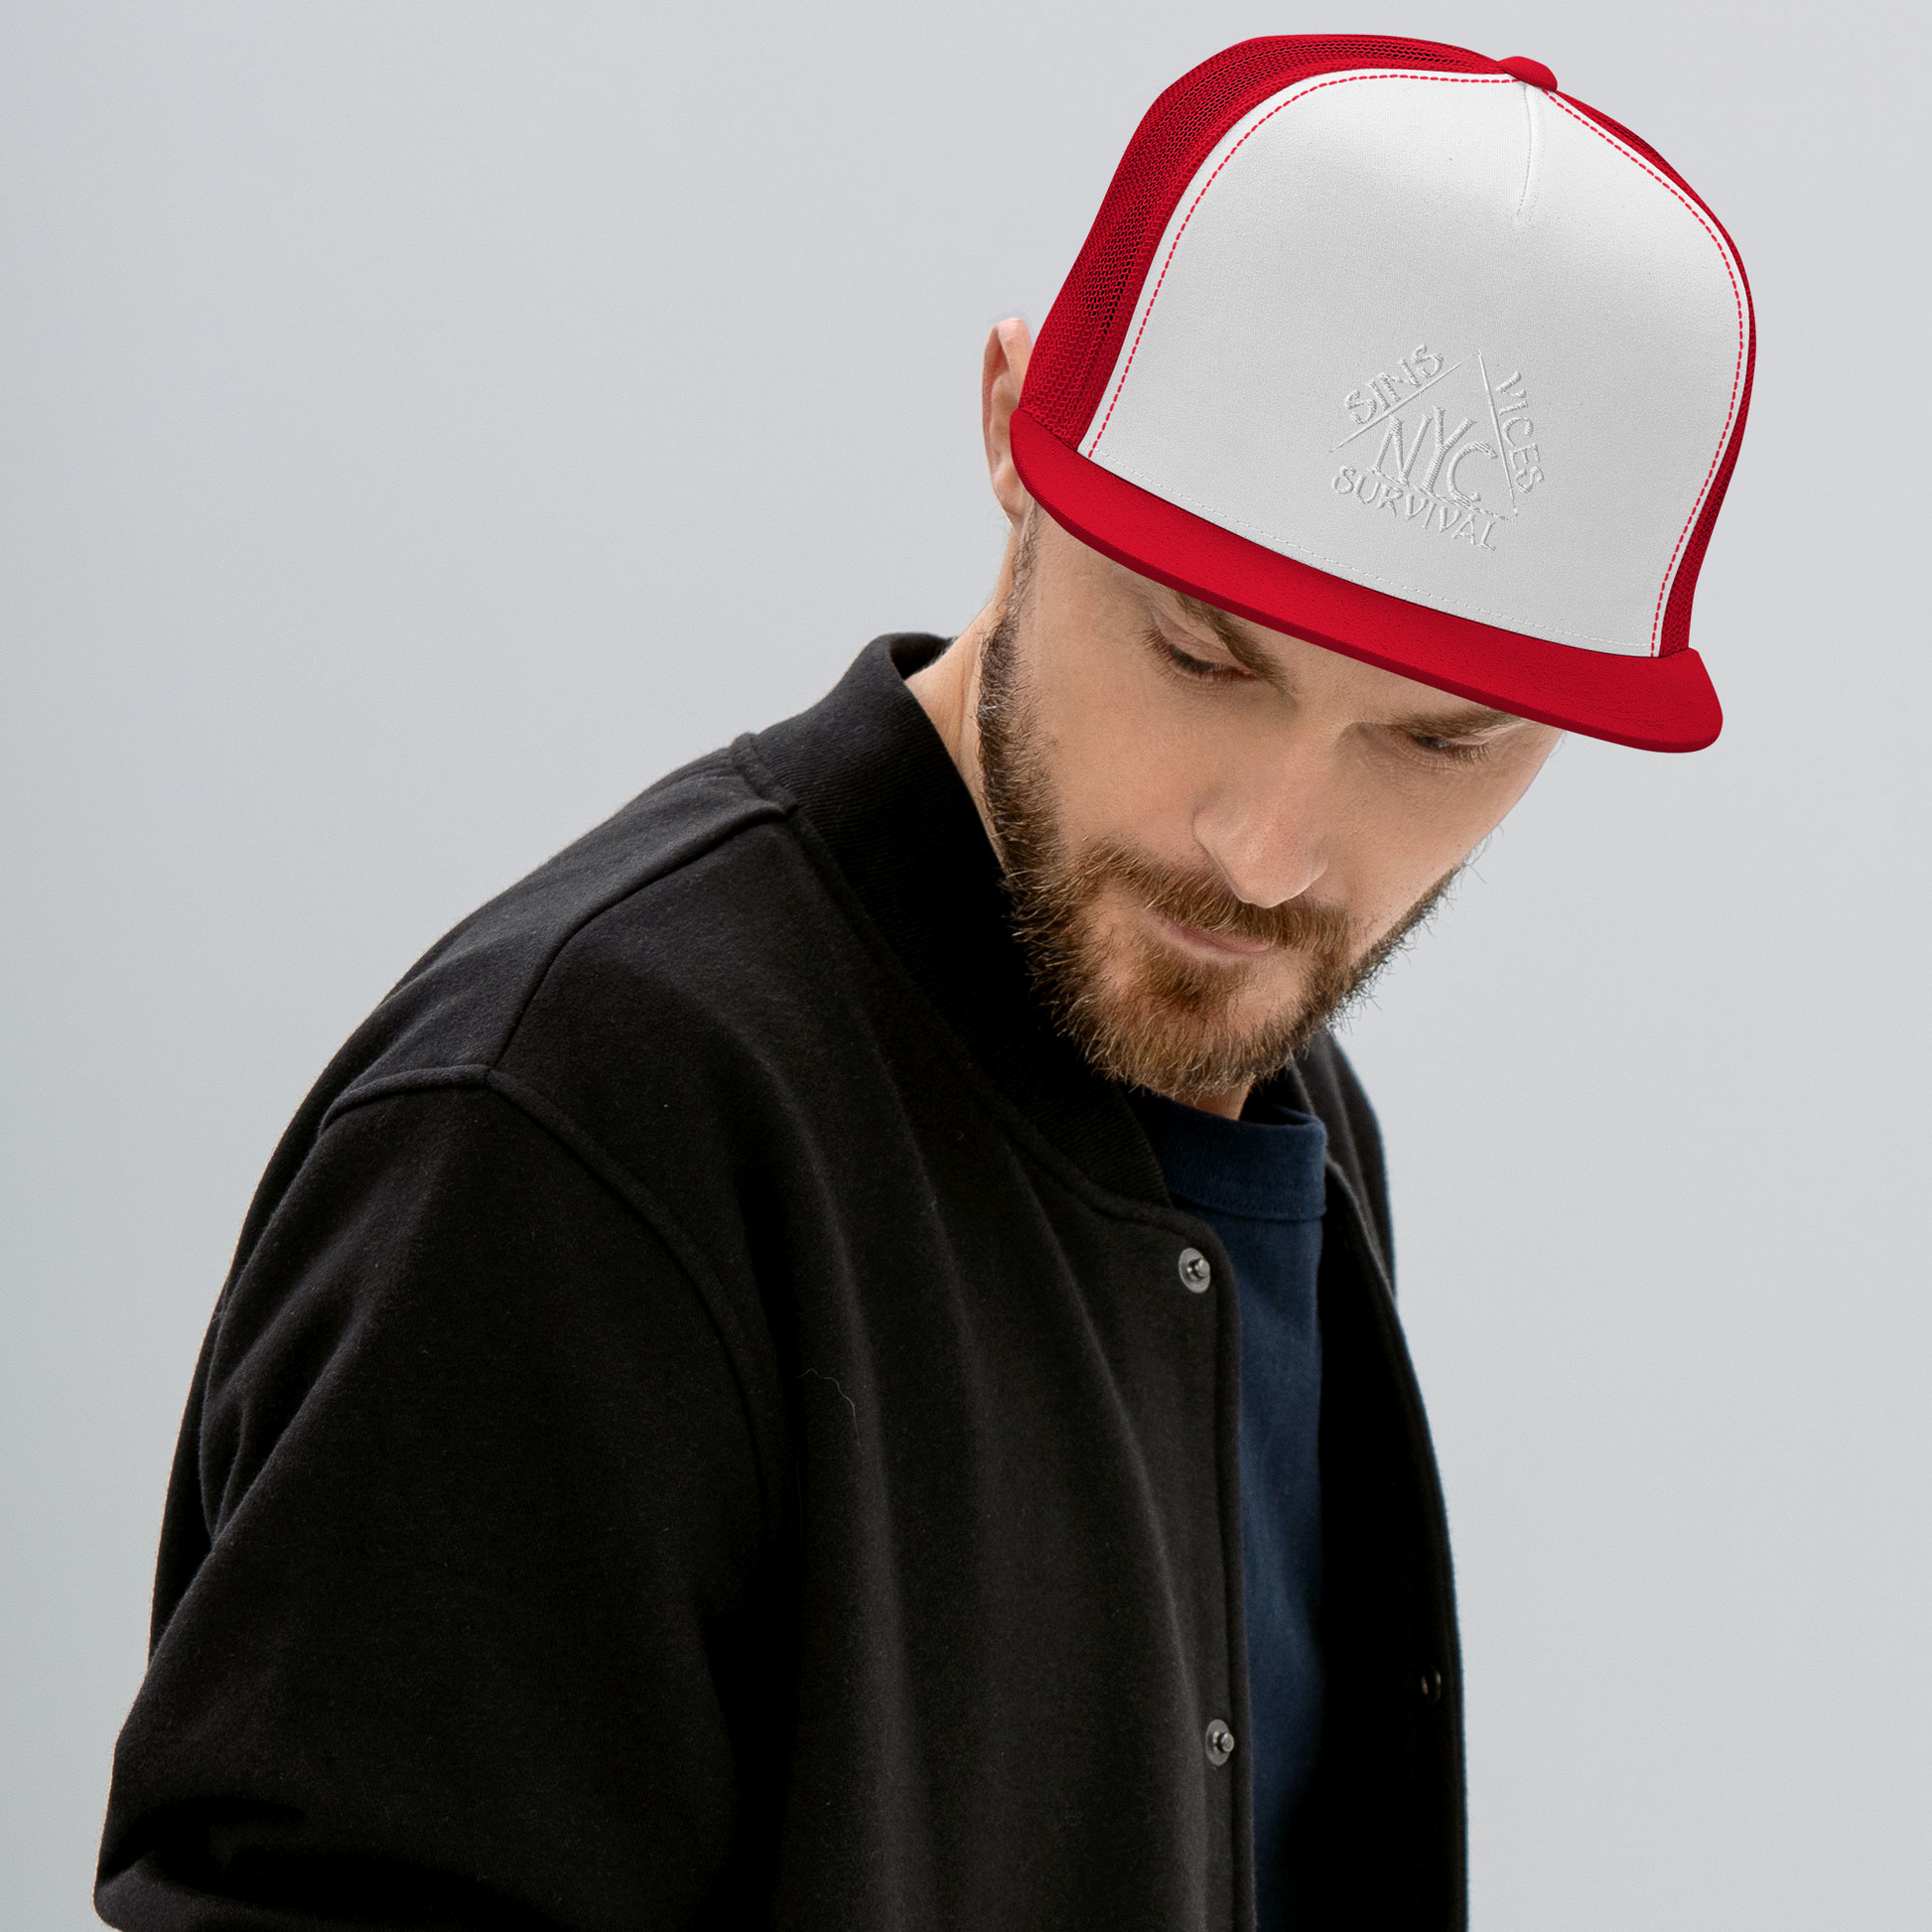 SNV Origins Trucker Cap Red white and red Front